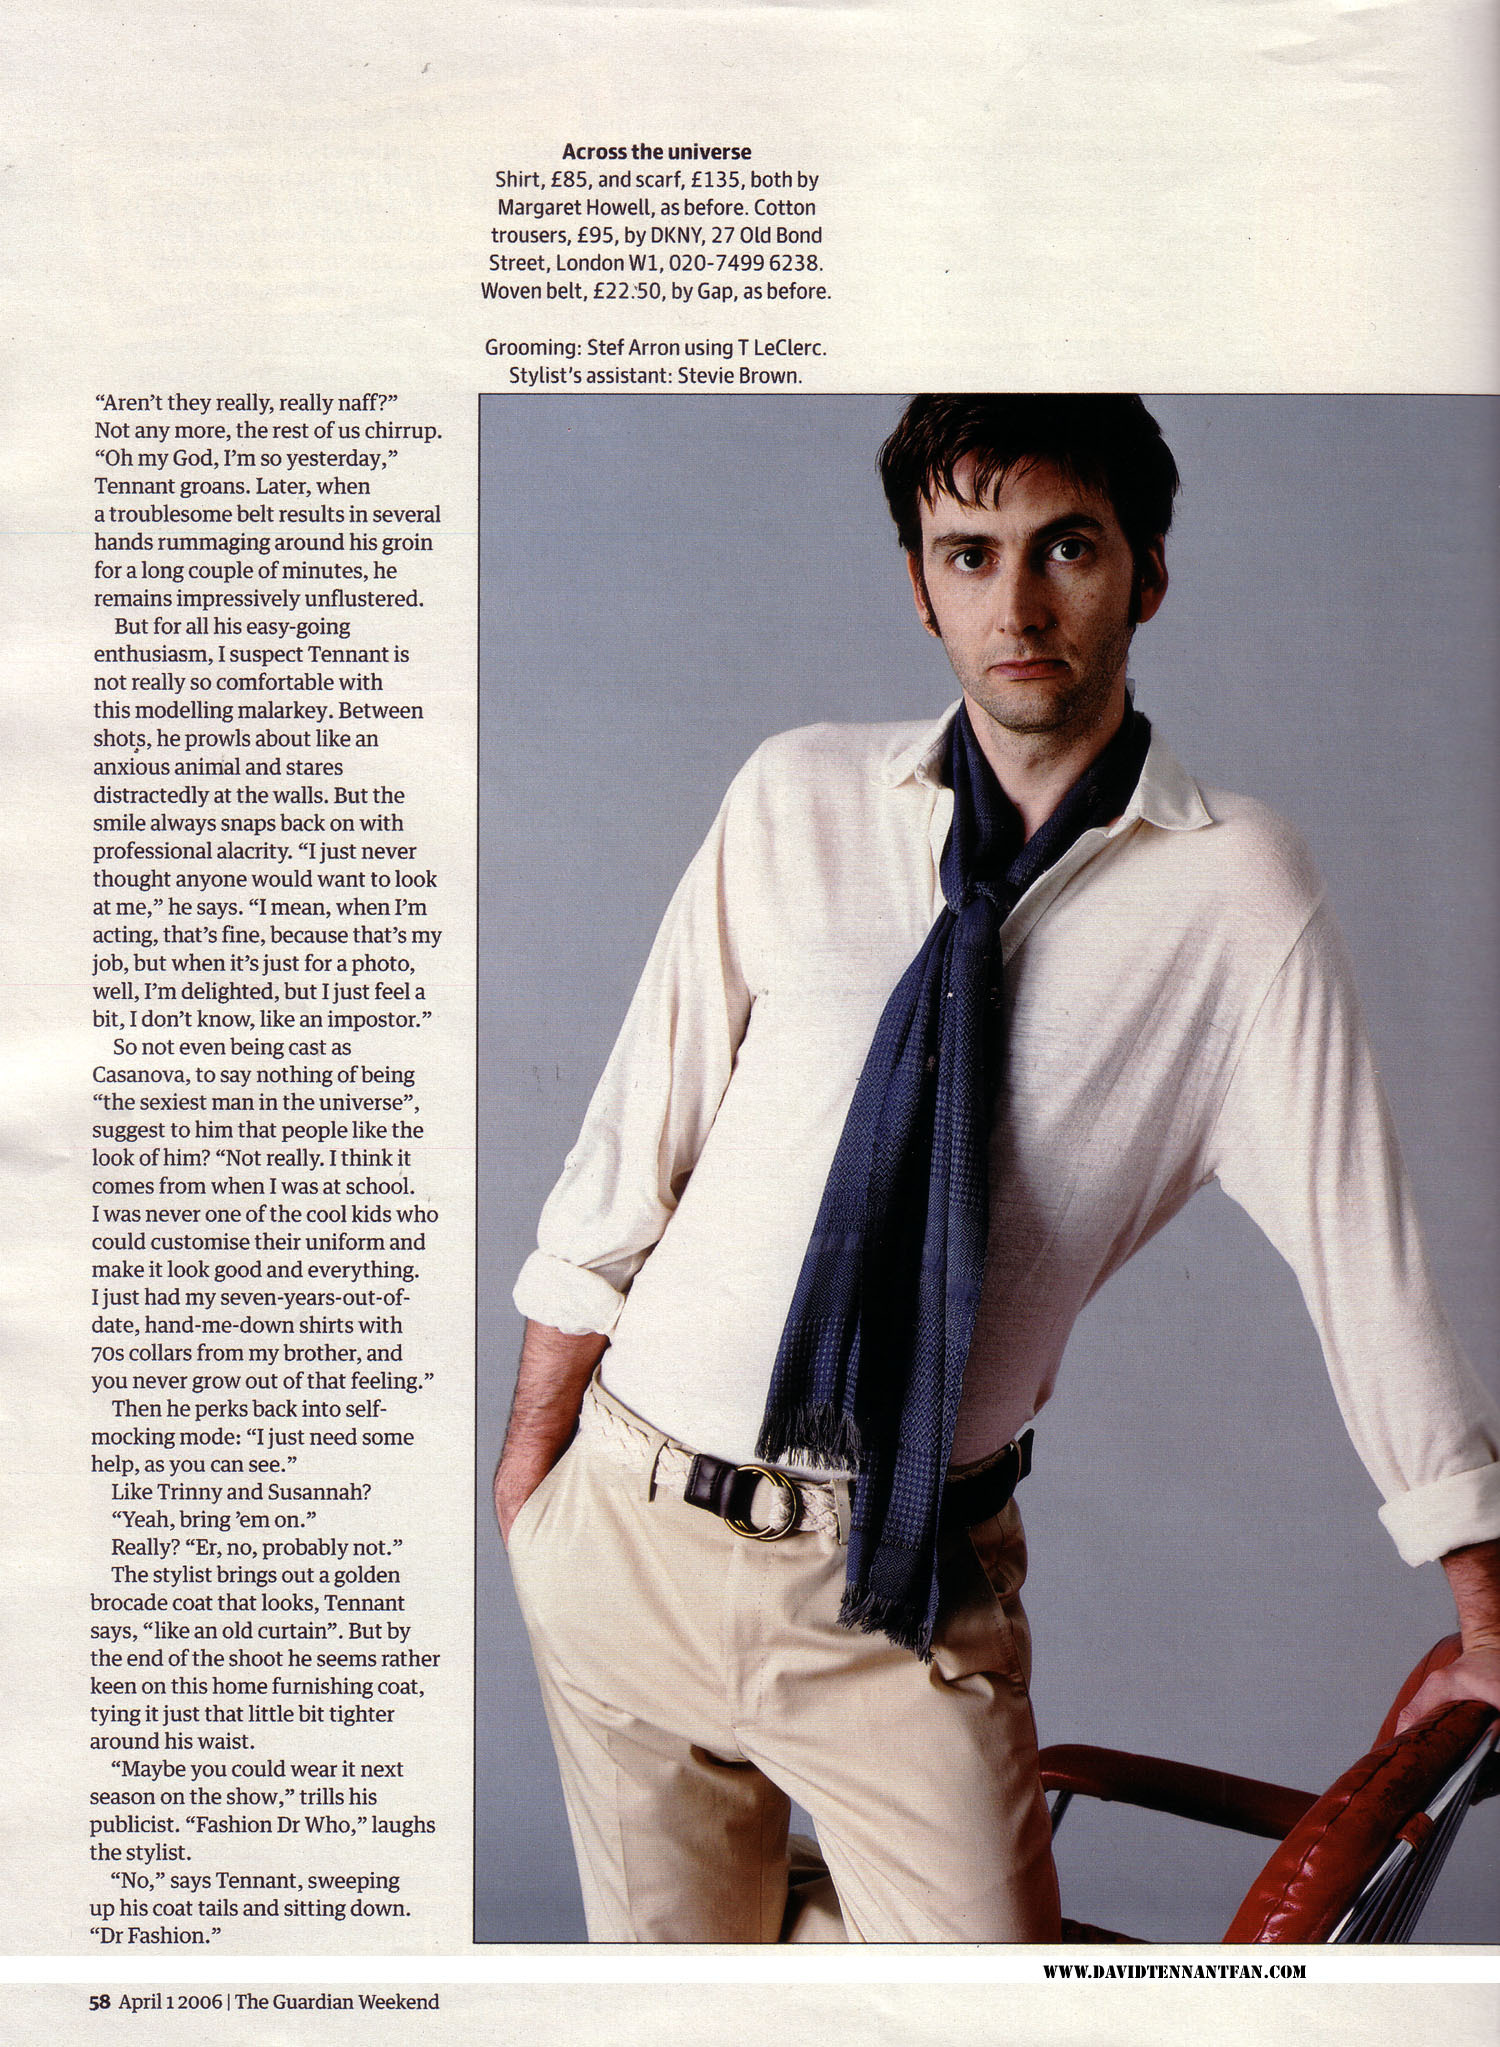 David Tennant Shirtless And Tempting Poses Pix Naked Male Celebrities